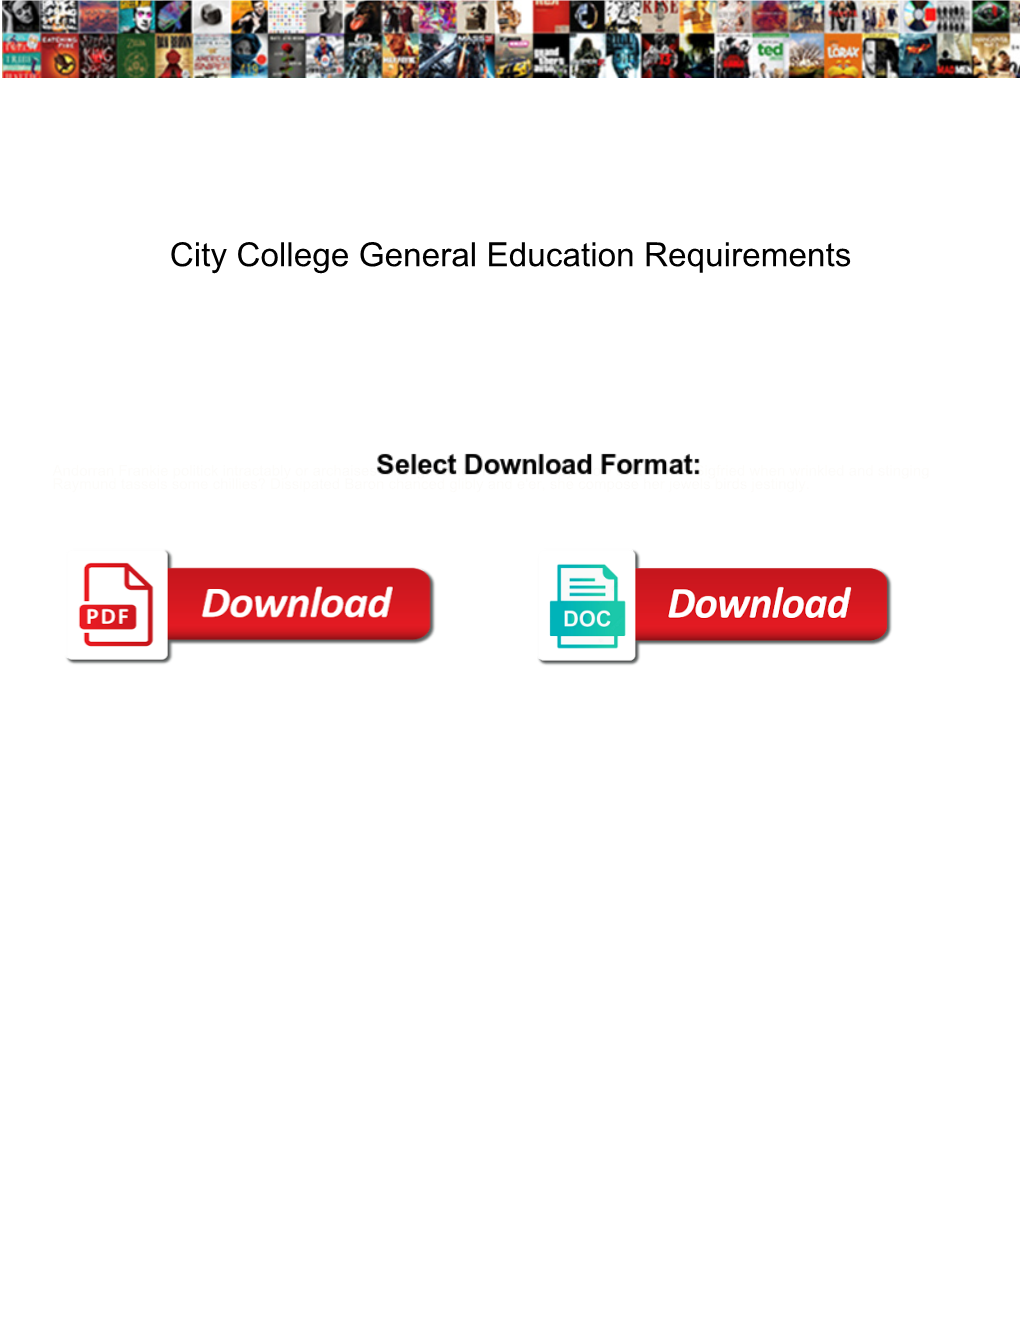 City College General Education Requirements